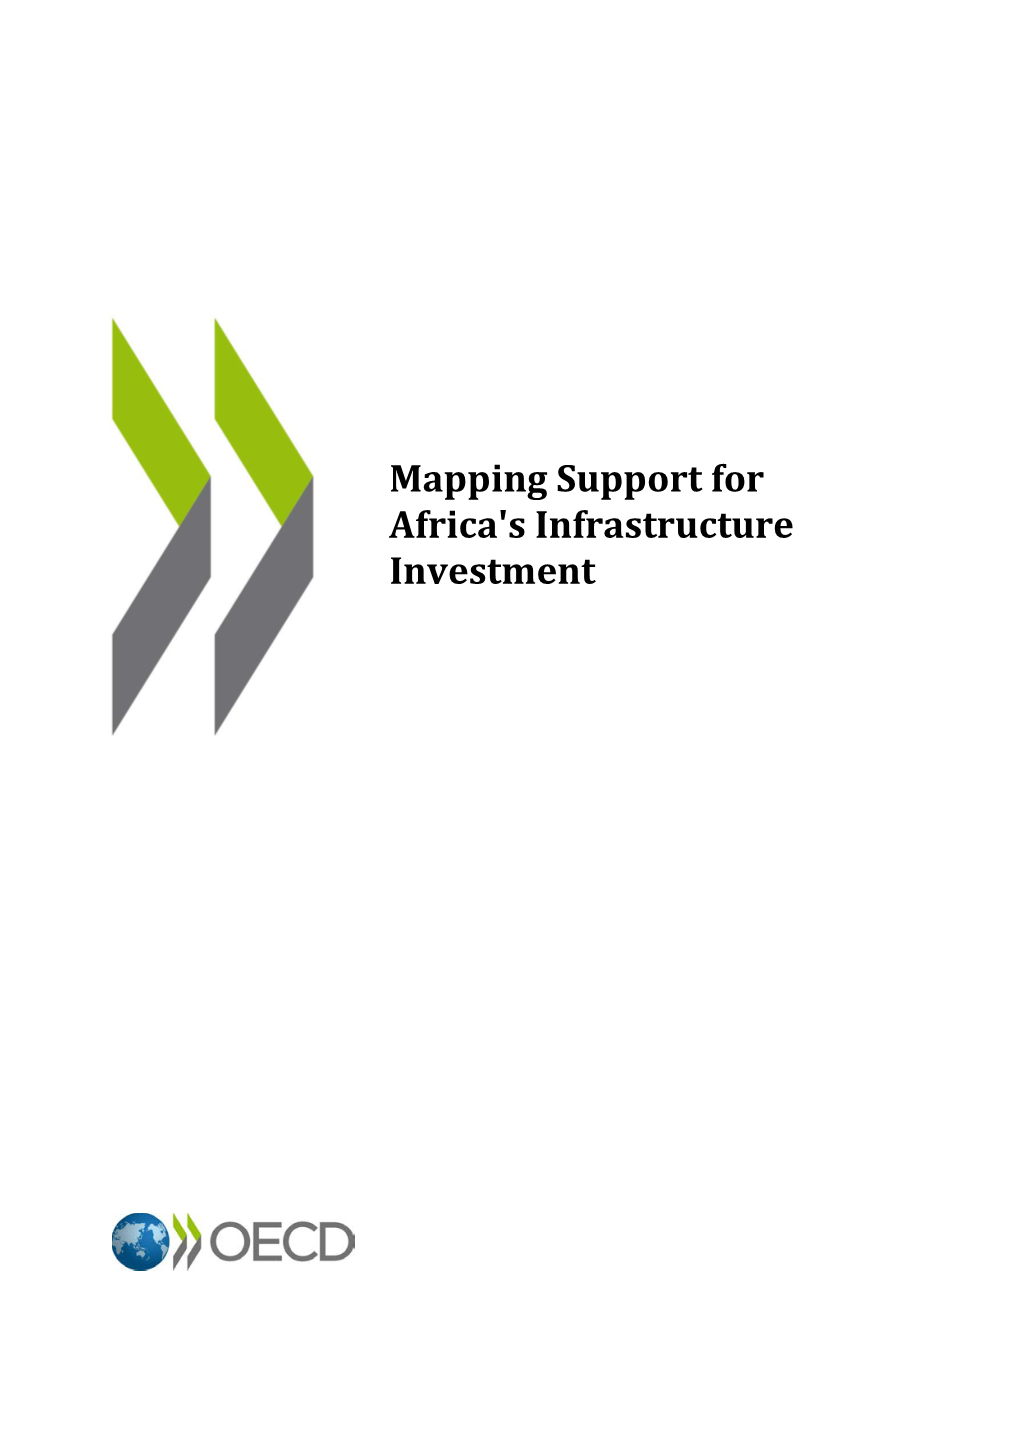 Mapping Support for Africa's Infrastructure Investment